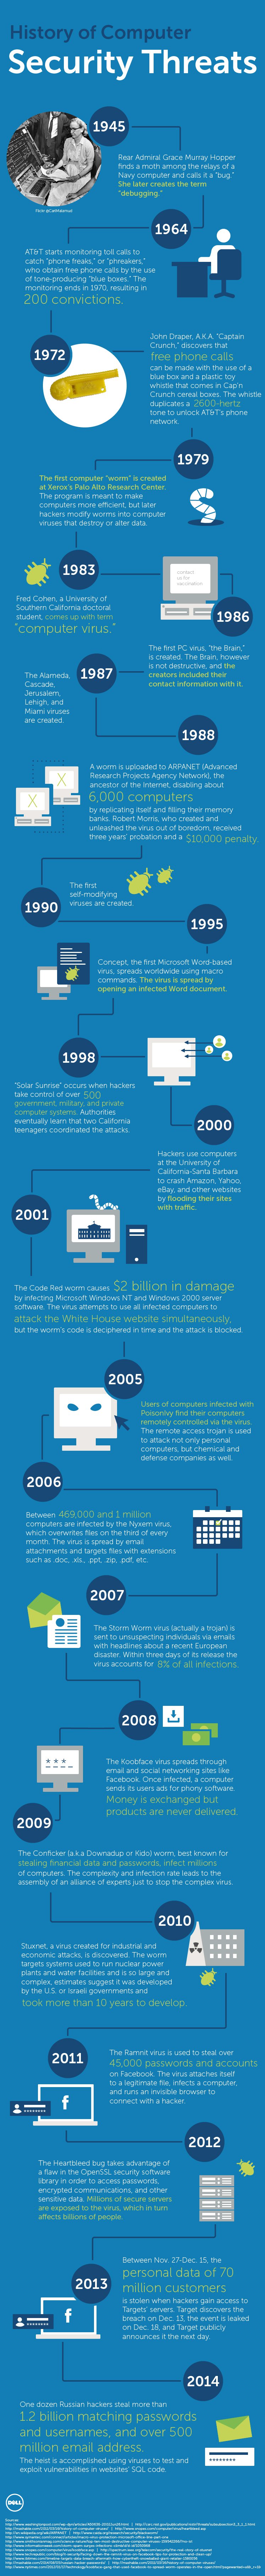 History of Computer Security Threats